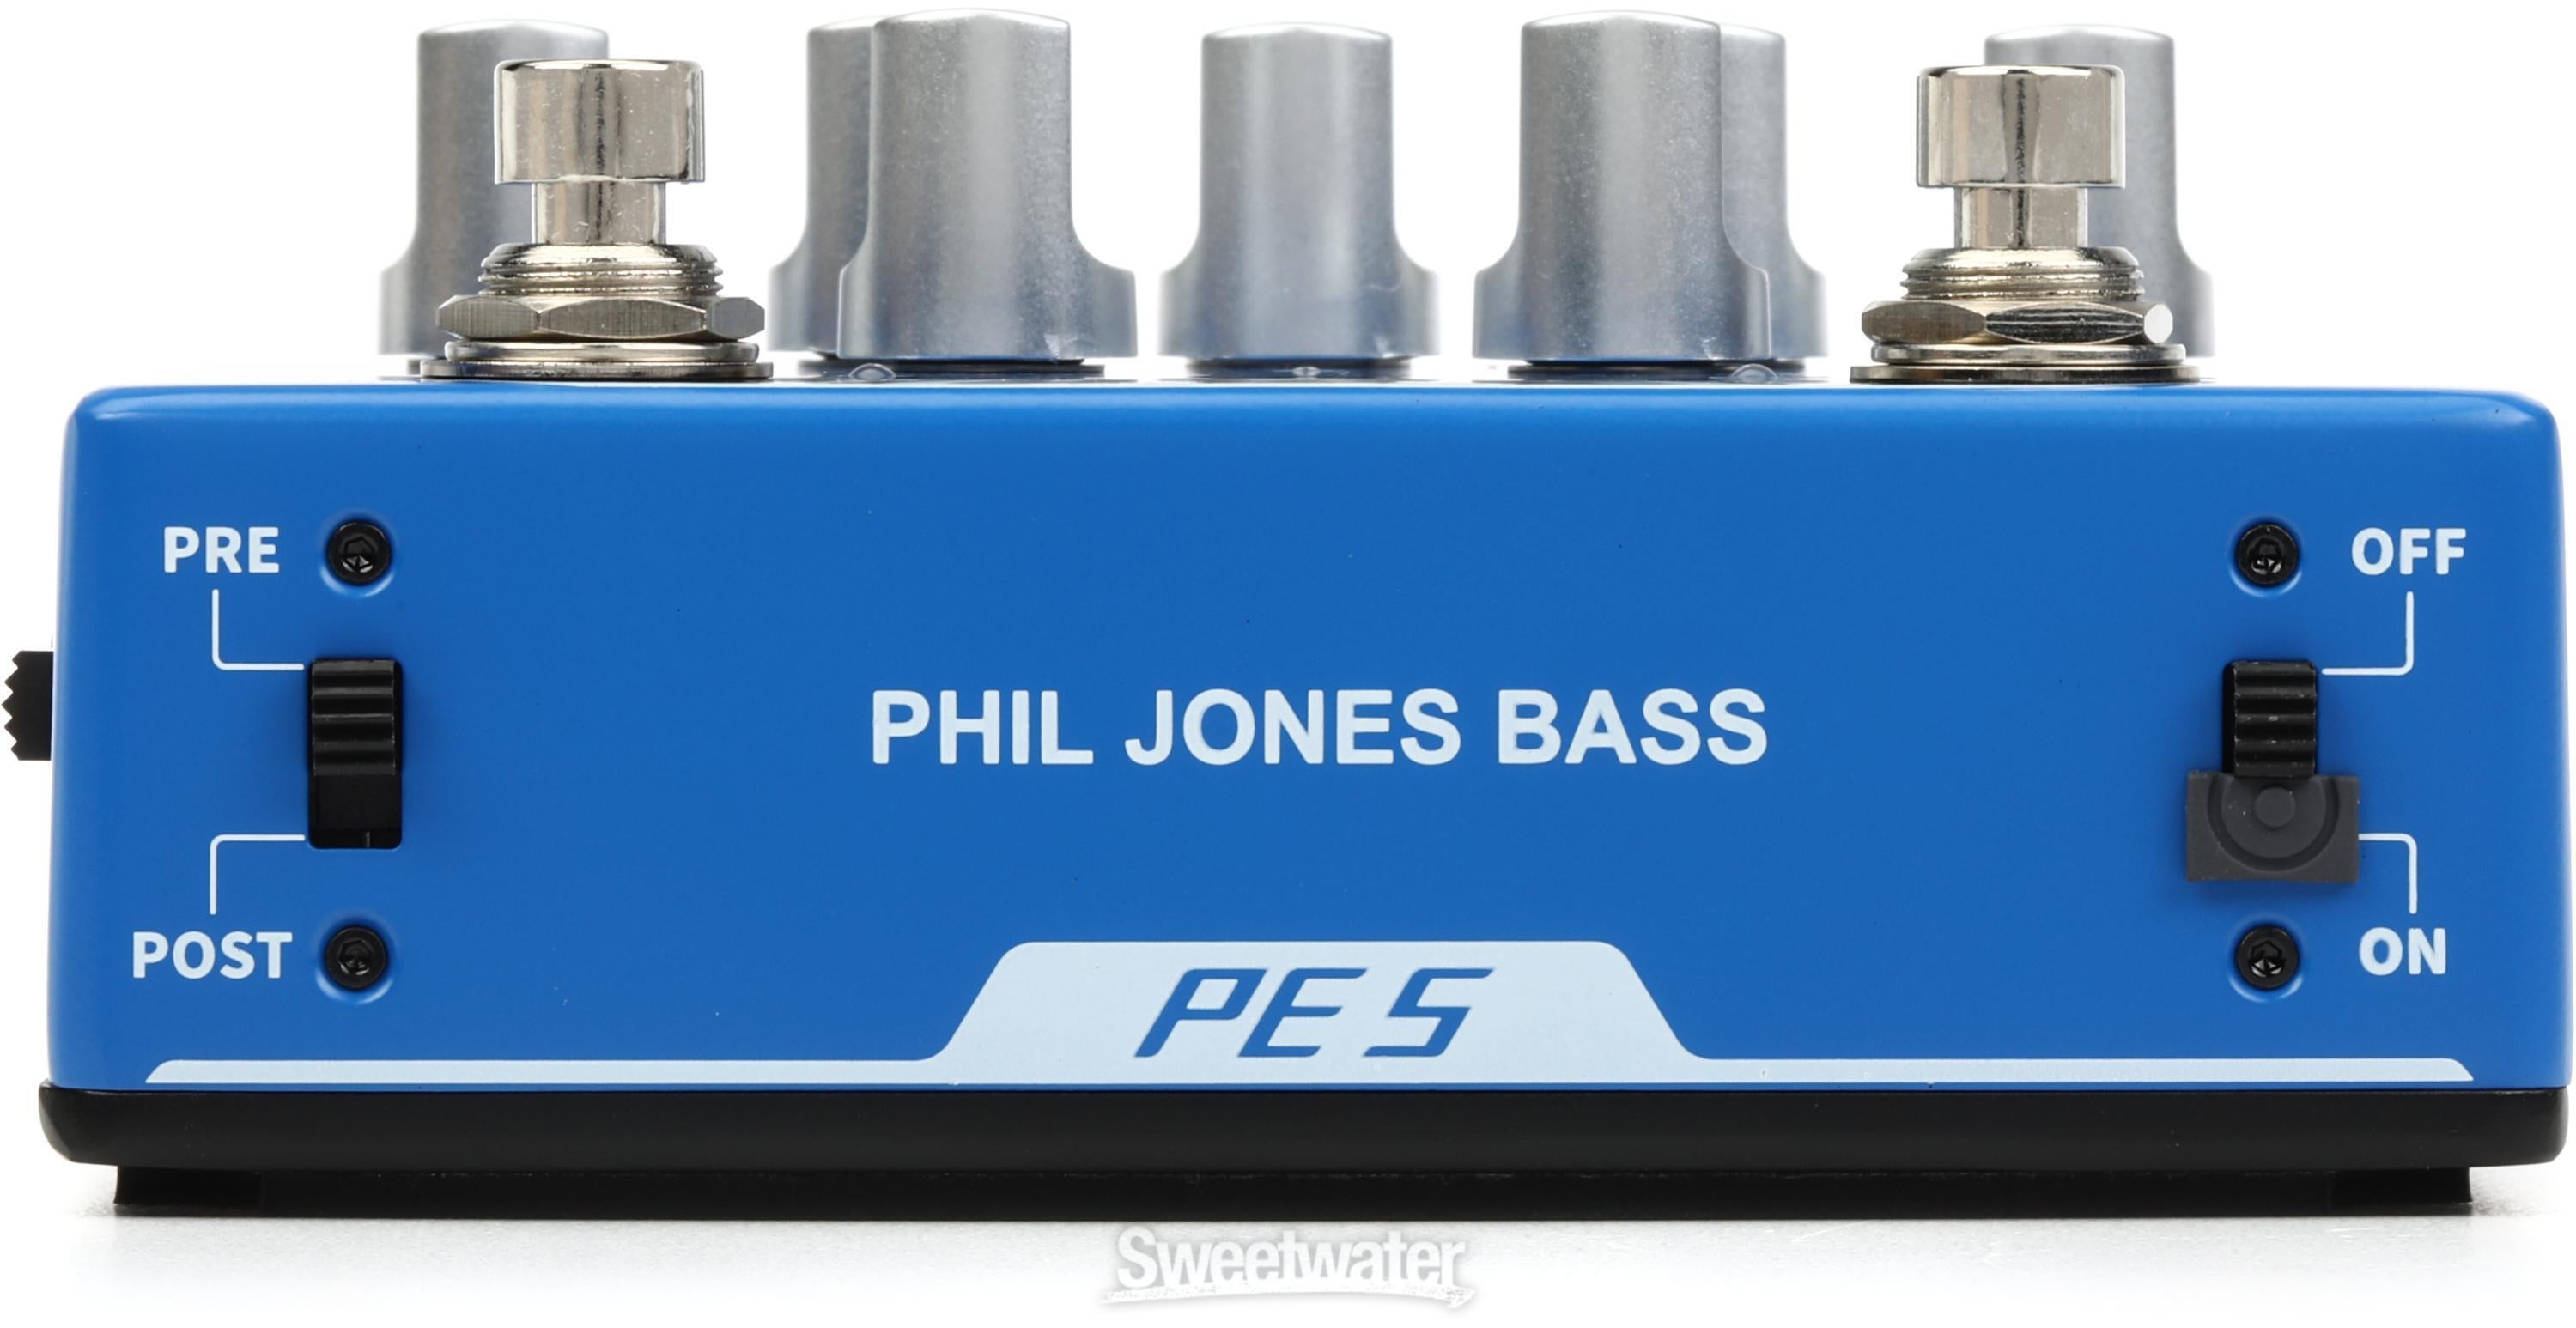 Phil Jones Bass PE-5 5-band EQ Preamp and Direct Box Pedal 